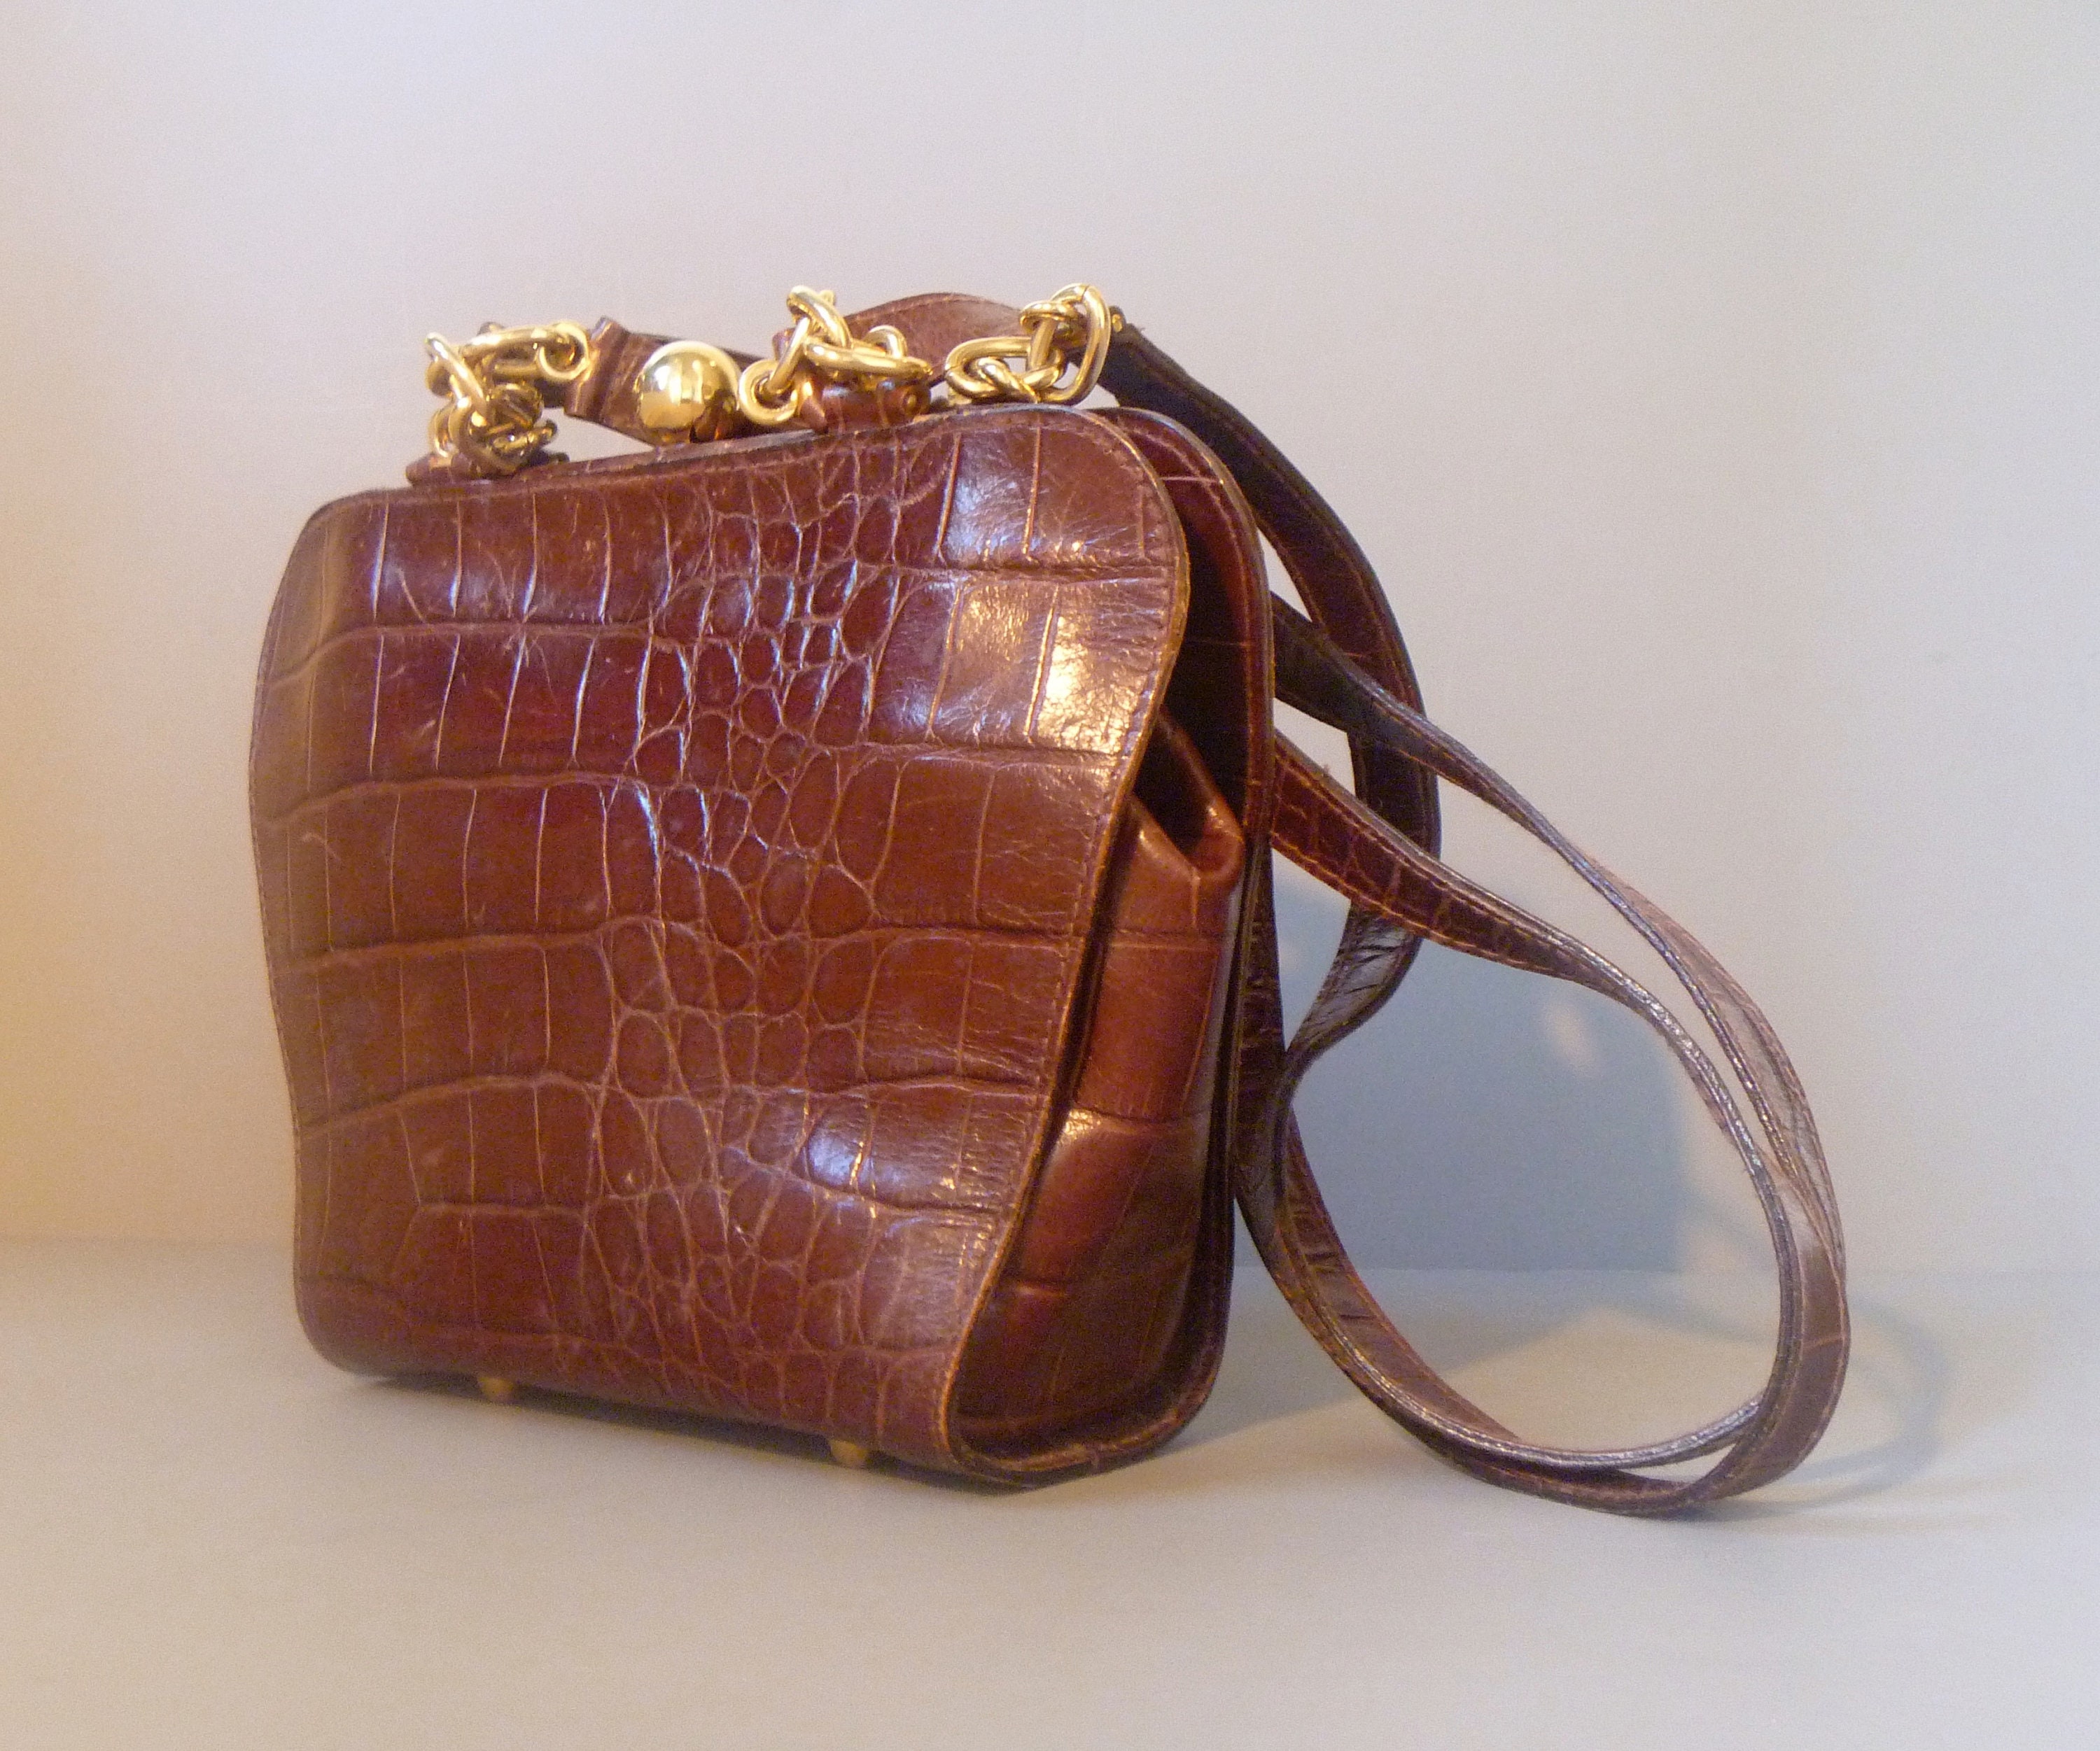 Dillard's Vintage Genuine Leather Made in Italy Cross Body